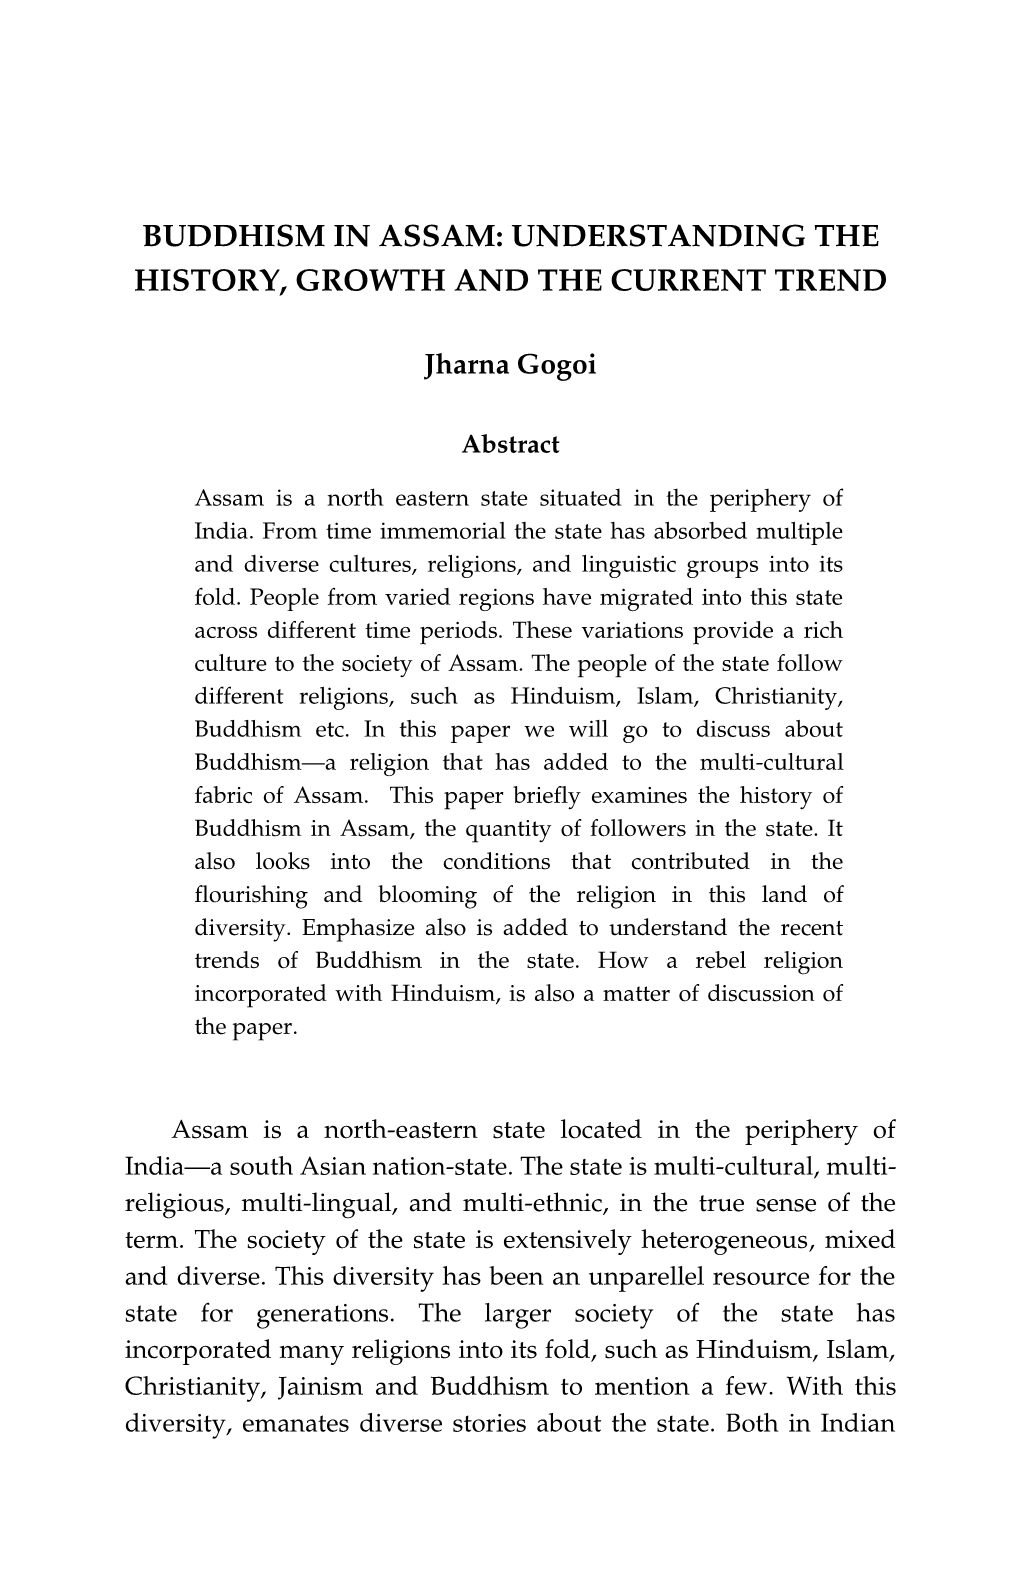 Buddhism in Assam: Understanding the History, Growth and the Current Trend